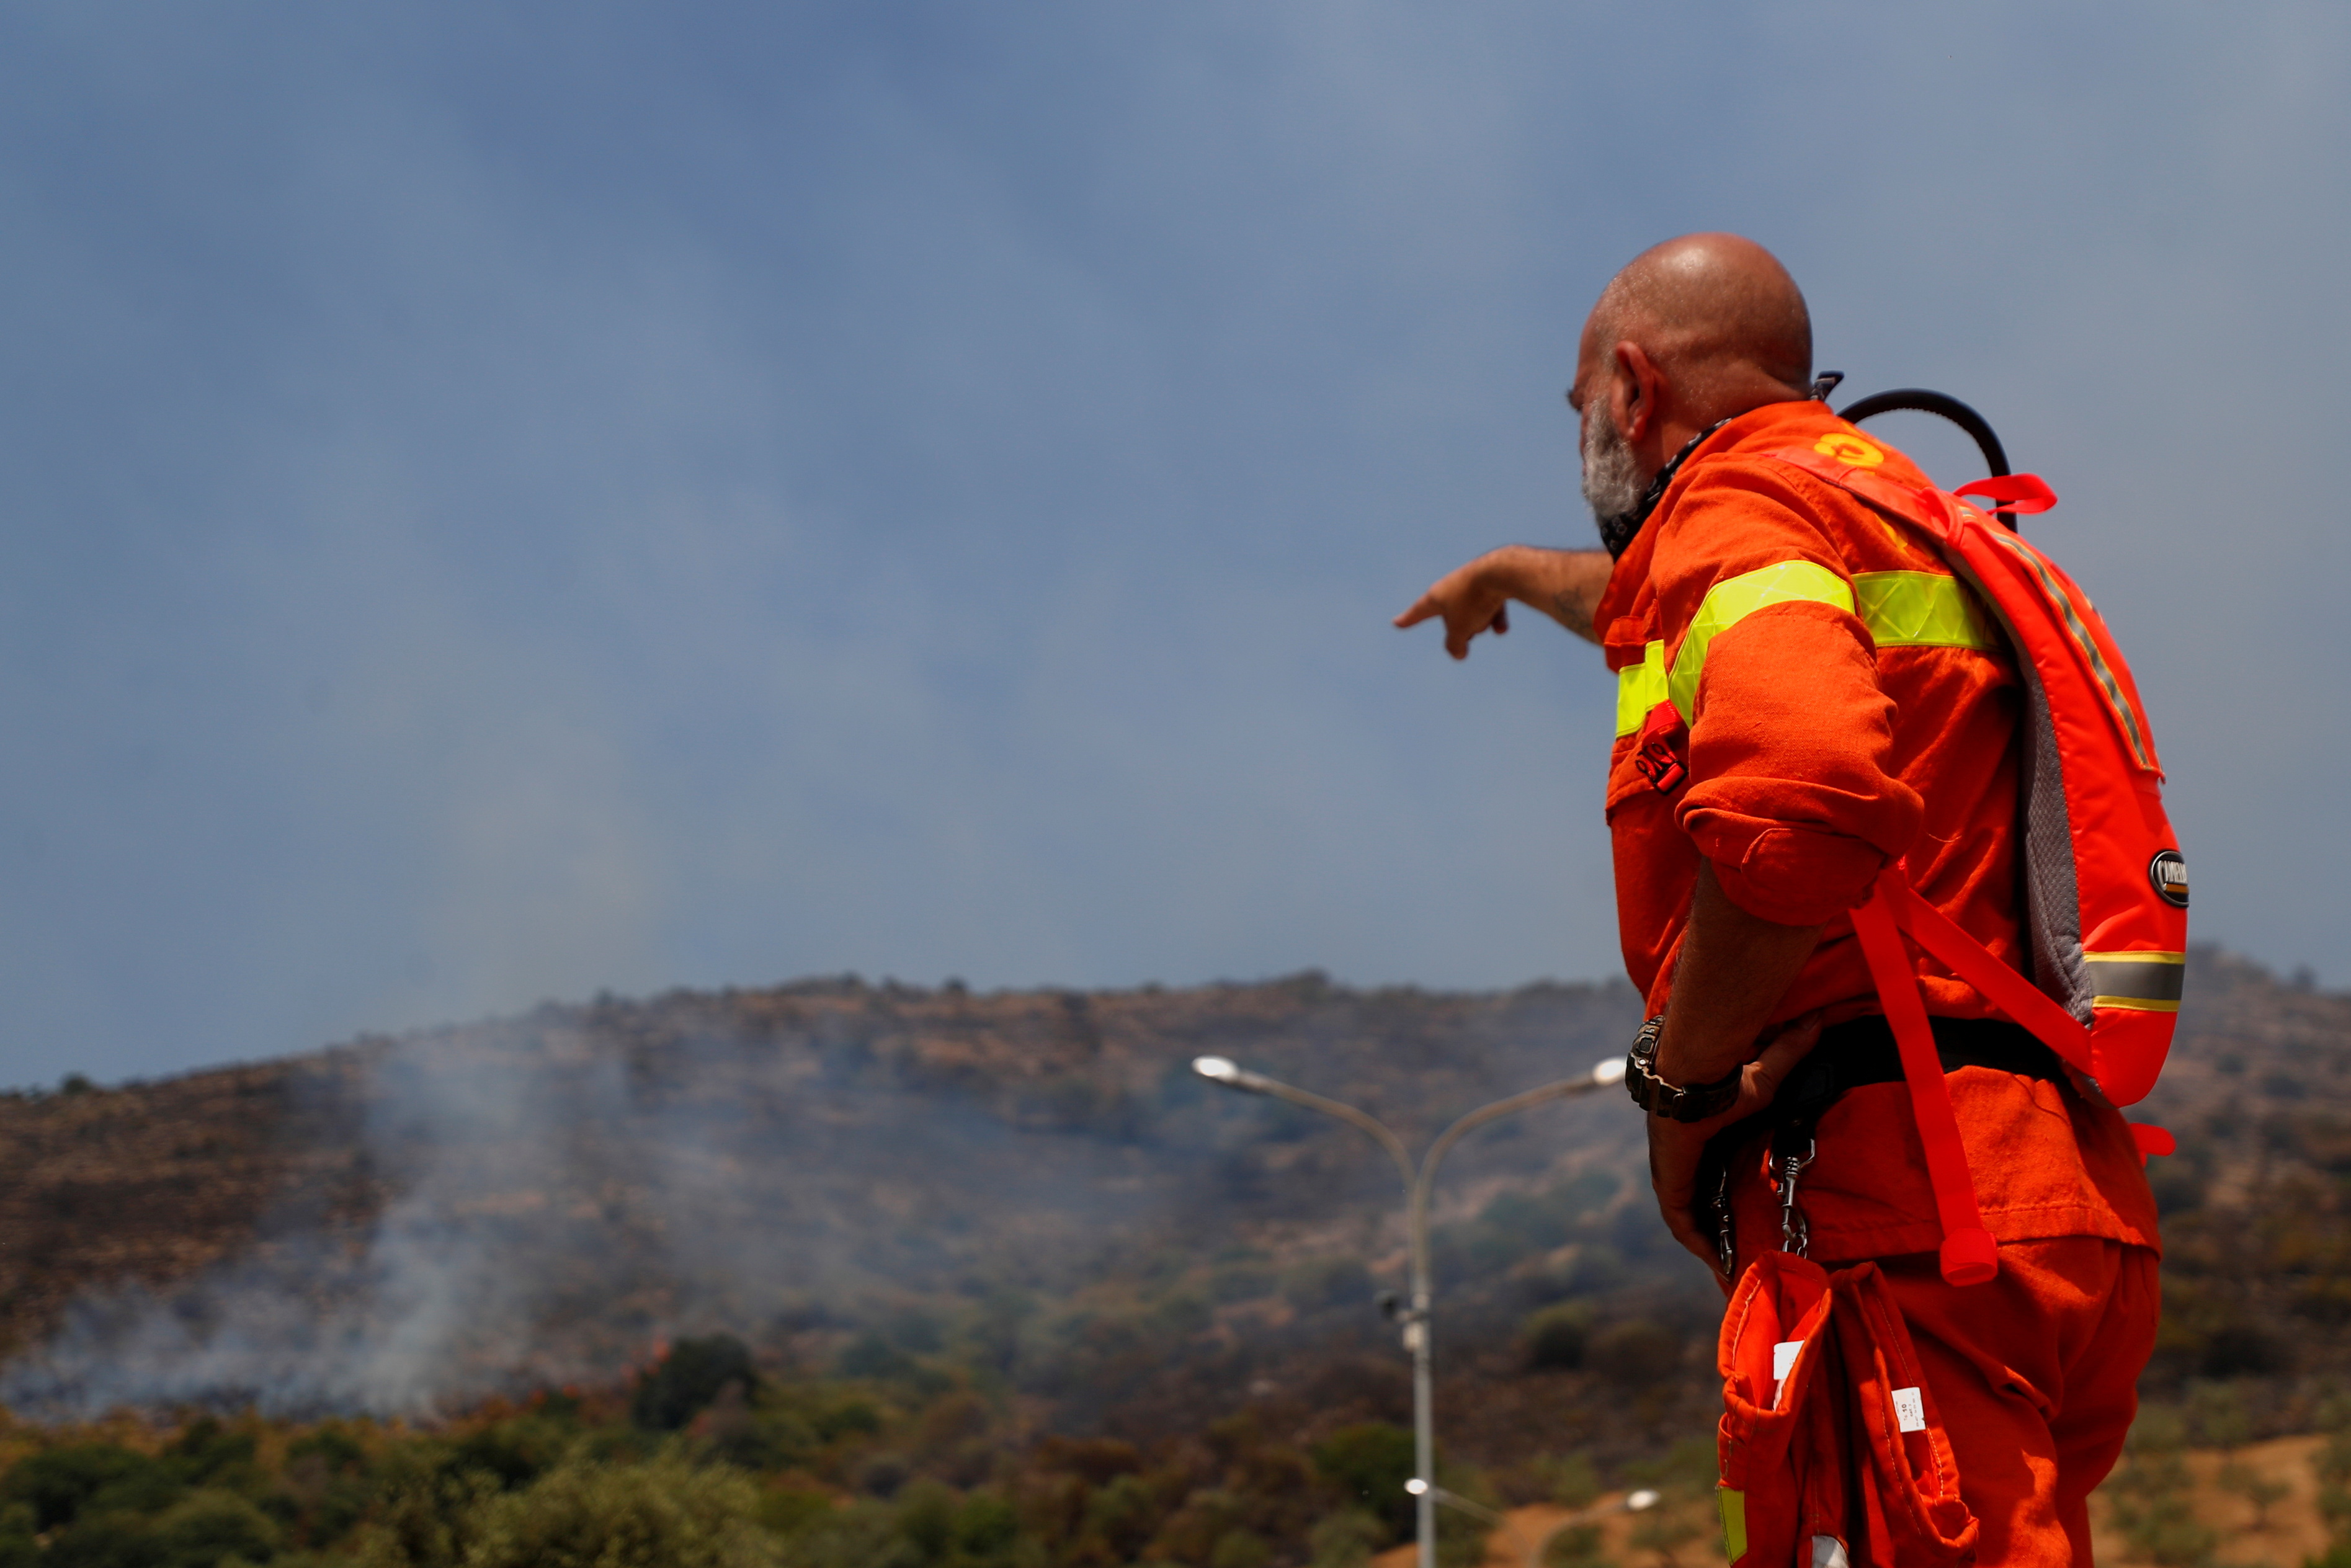 A firefighter points at a wildfire in the Monte Catillo nature reserve in Tivoli, near Rome, Italy, August 13, 2021. REUTERS/Guglielmo Mangiapane